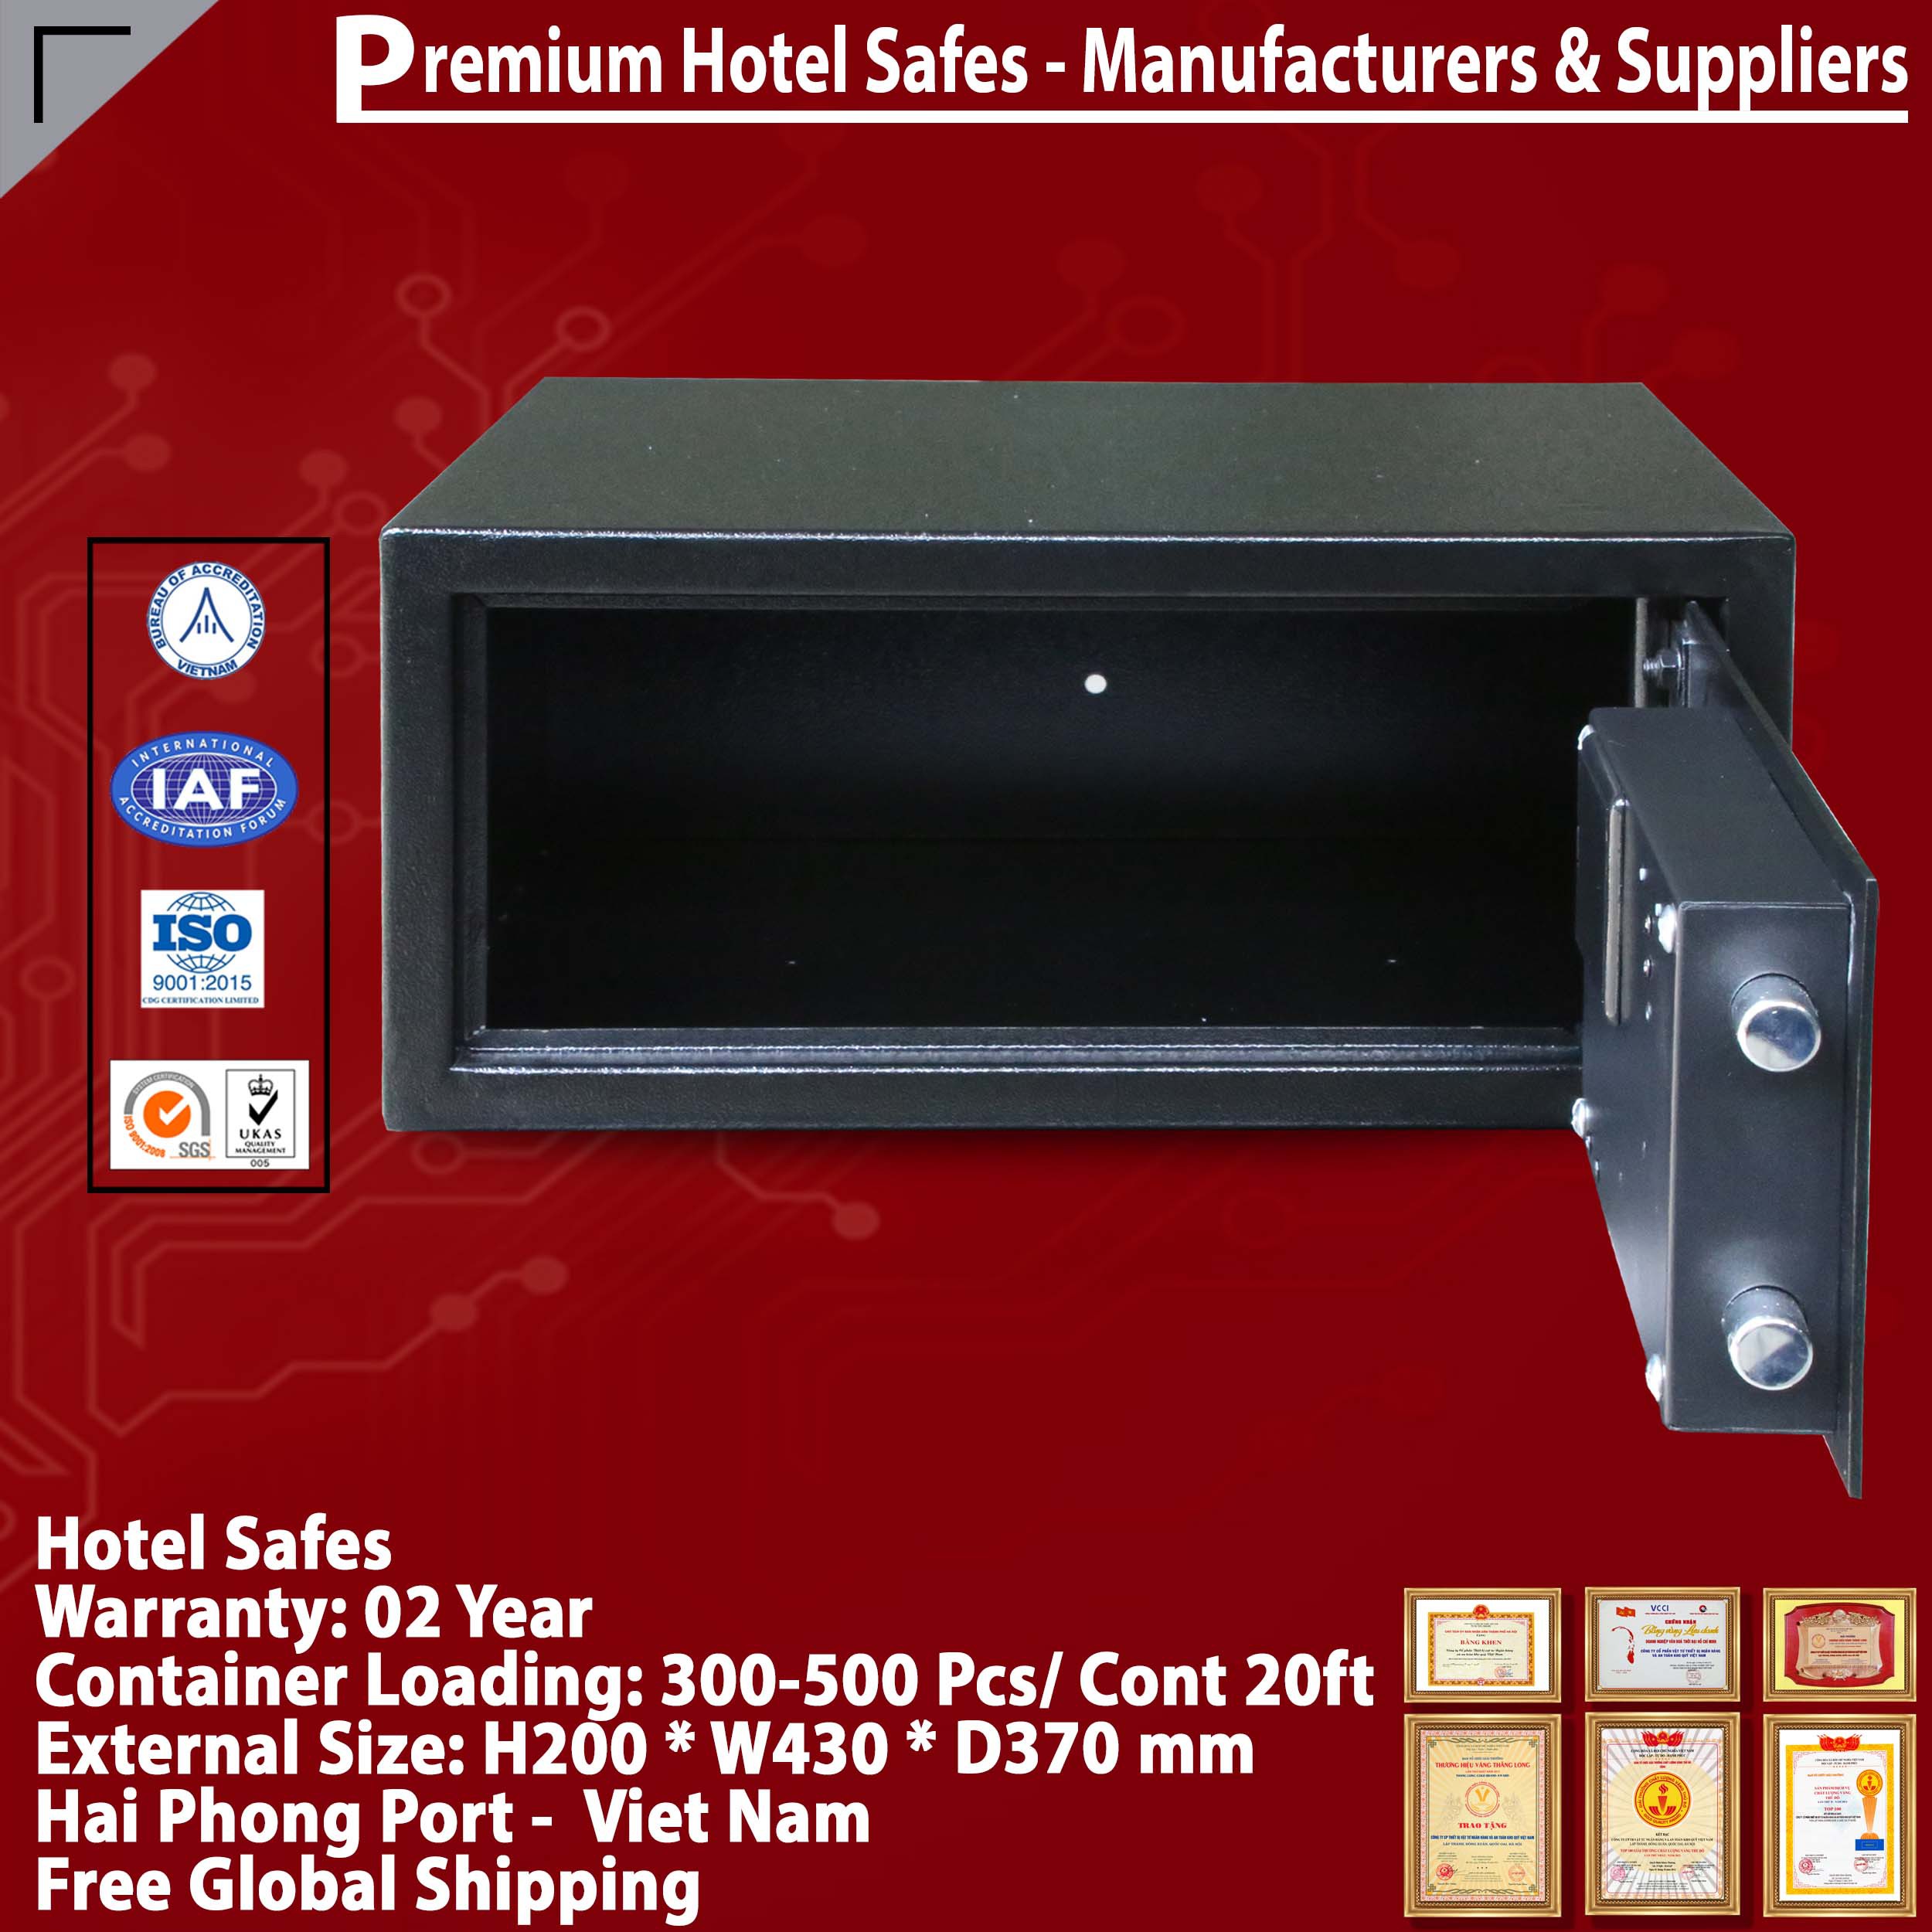 Hotel Safety Deposit Box Made In Viet Nam For Sale